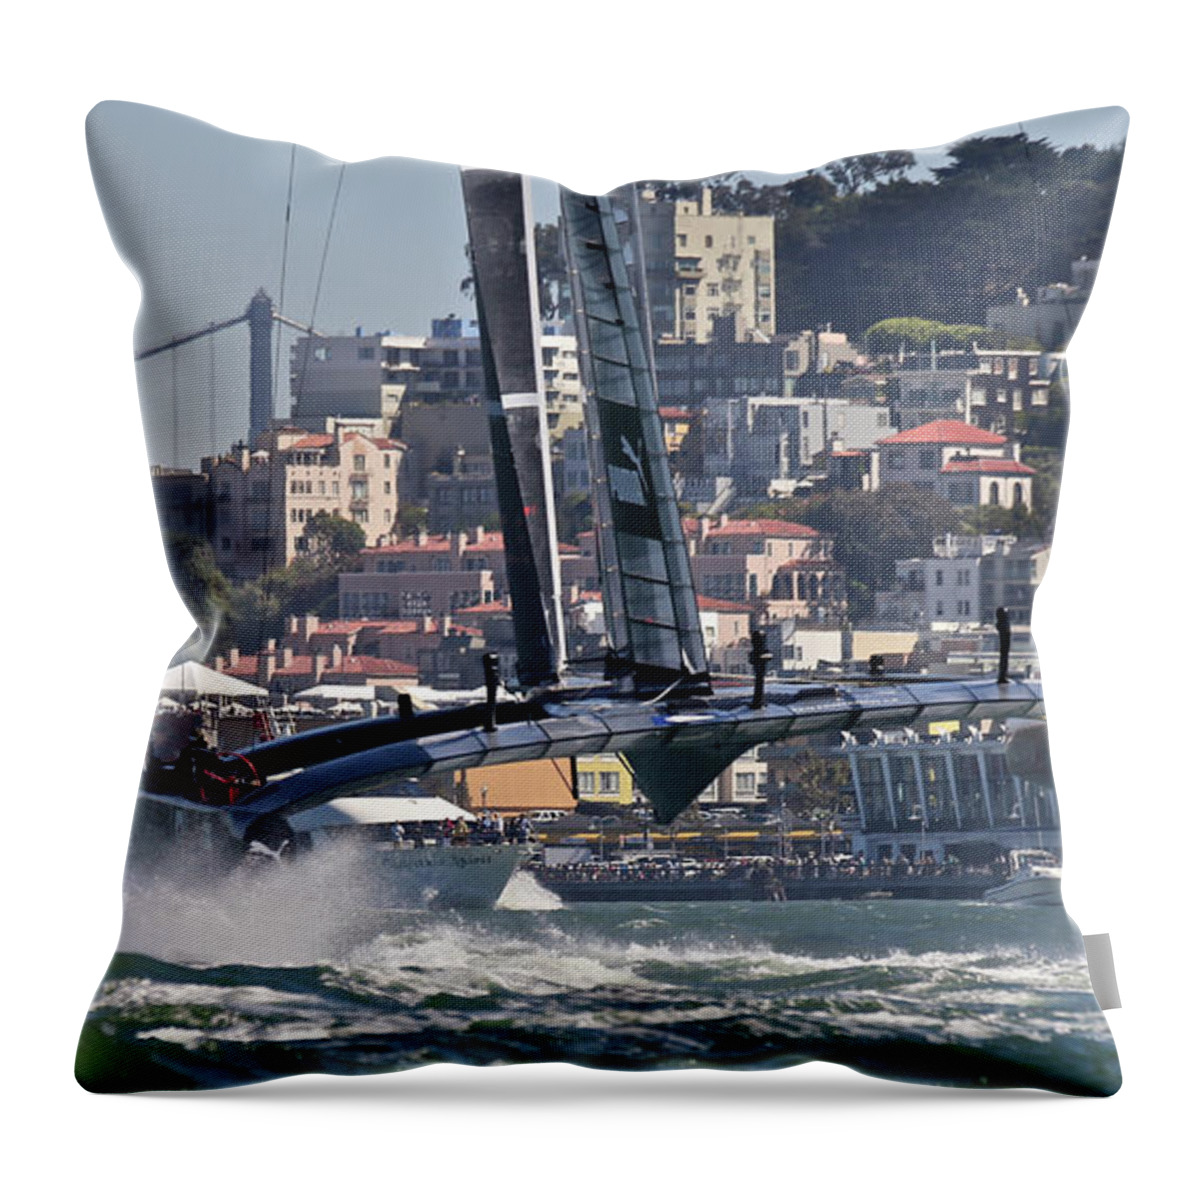 Sloop Throw Pillow featuring the photograph Nice Day #3 by Steven Lapkin